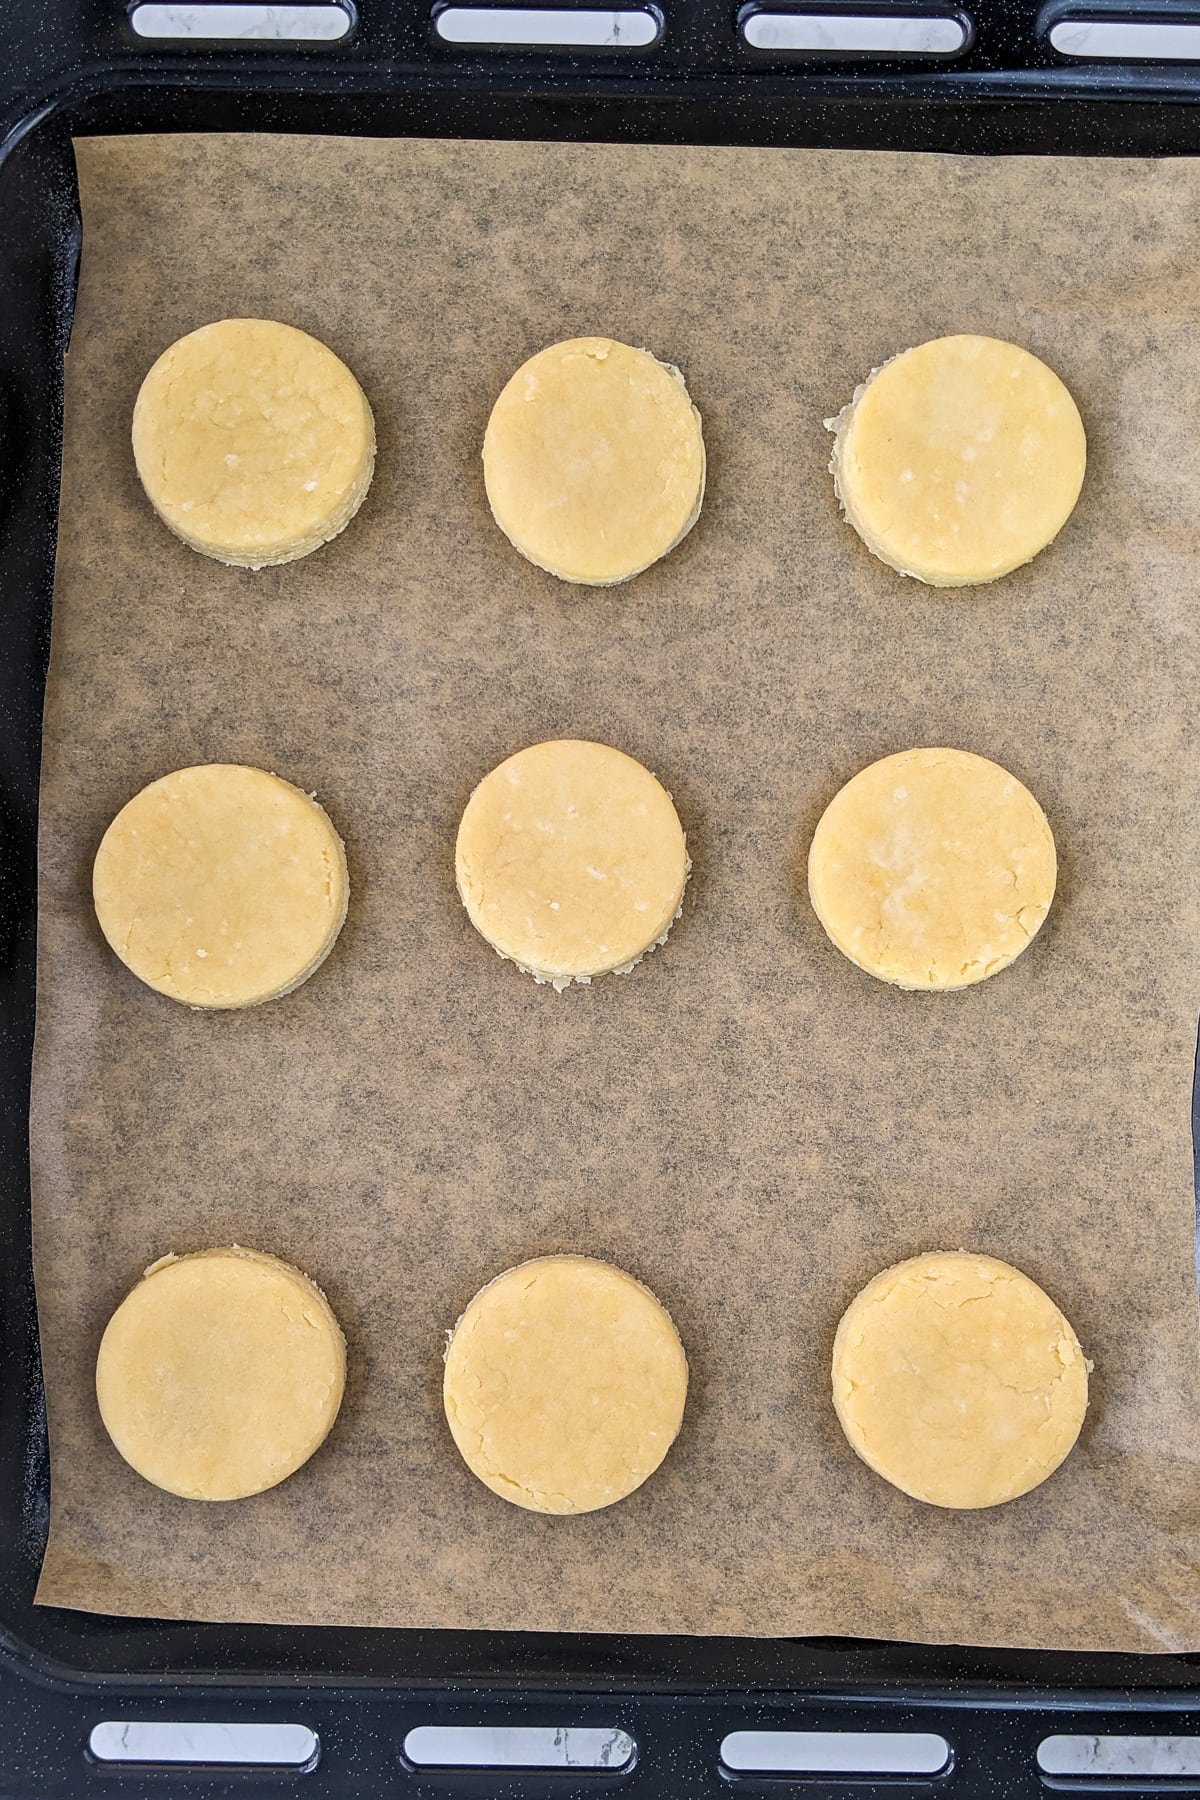 Top view of raw basic biscuits on a traybake.